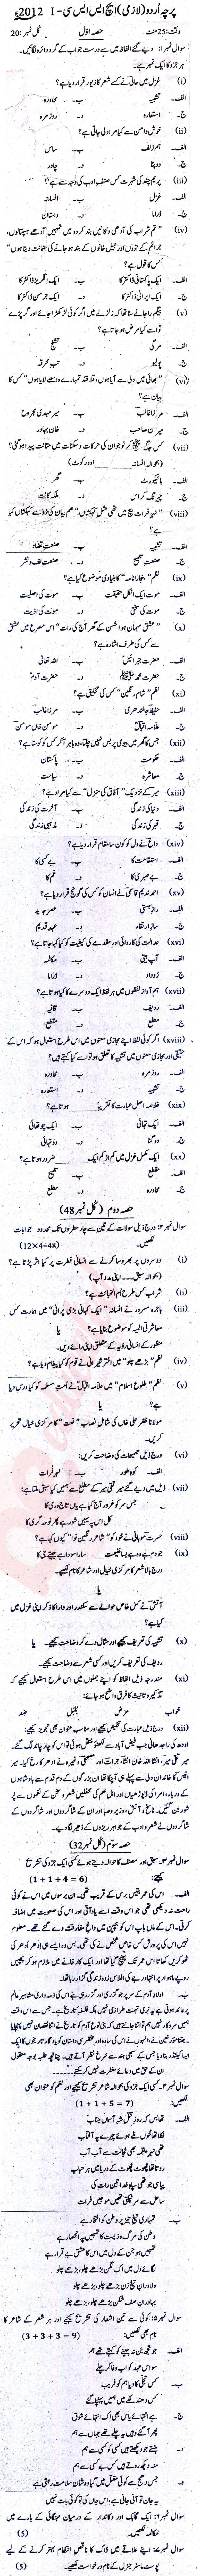 Urdu 11th class Past Paper Group 1 Federal BISE  2012